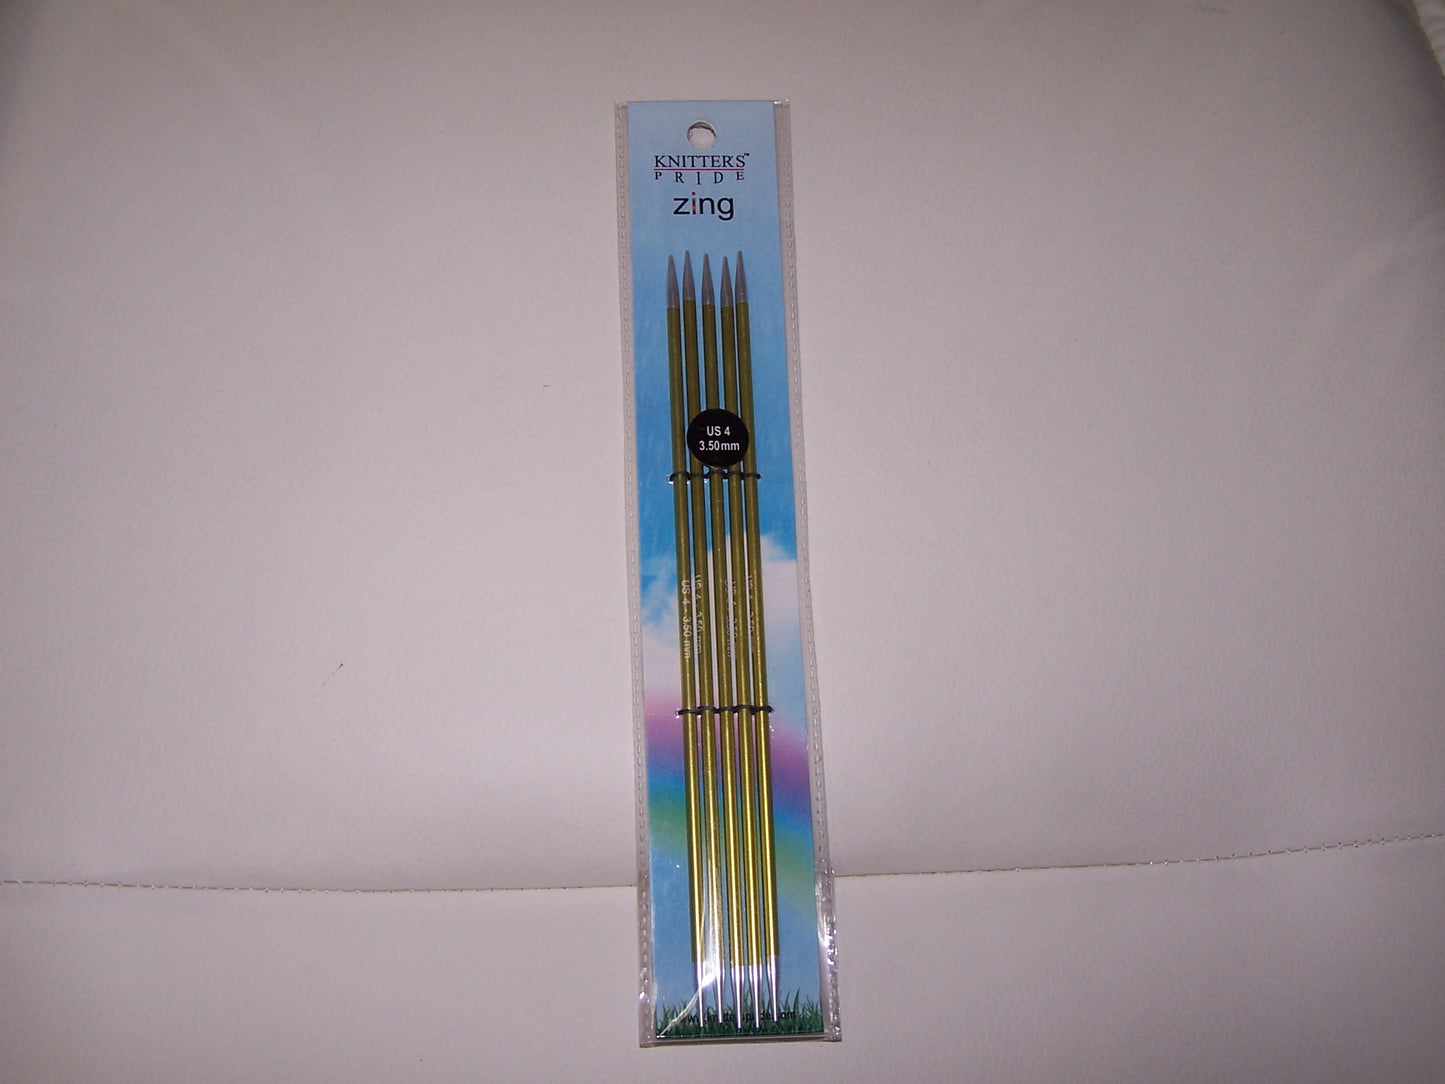 Knitters Pride Zing US 4 (3.50mm) size 8 inch DPN's